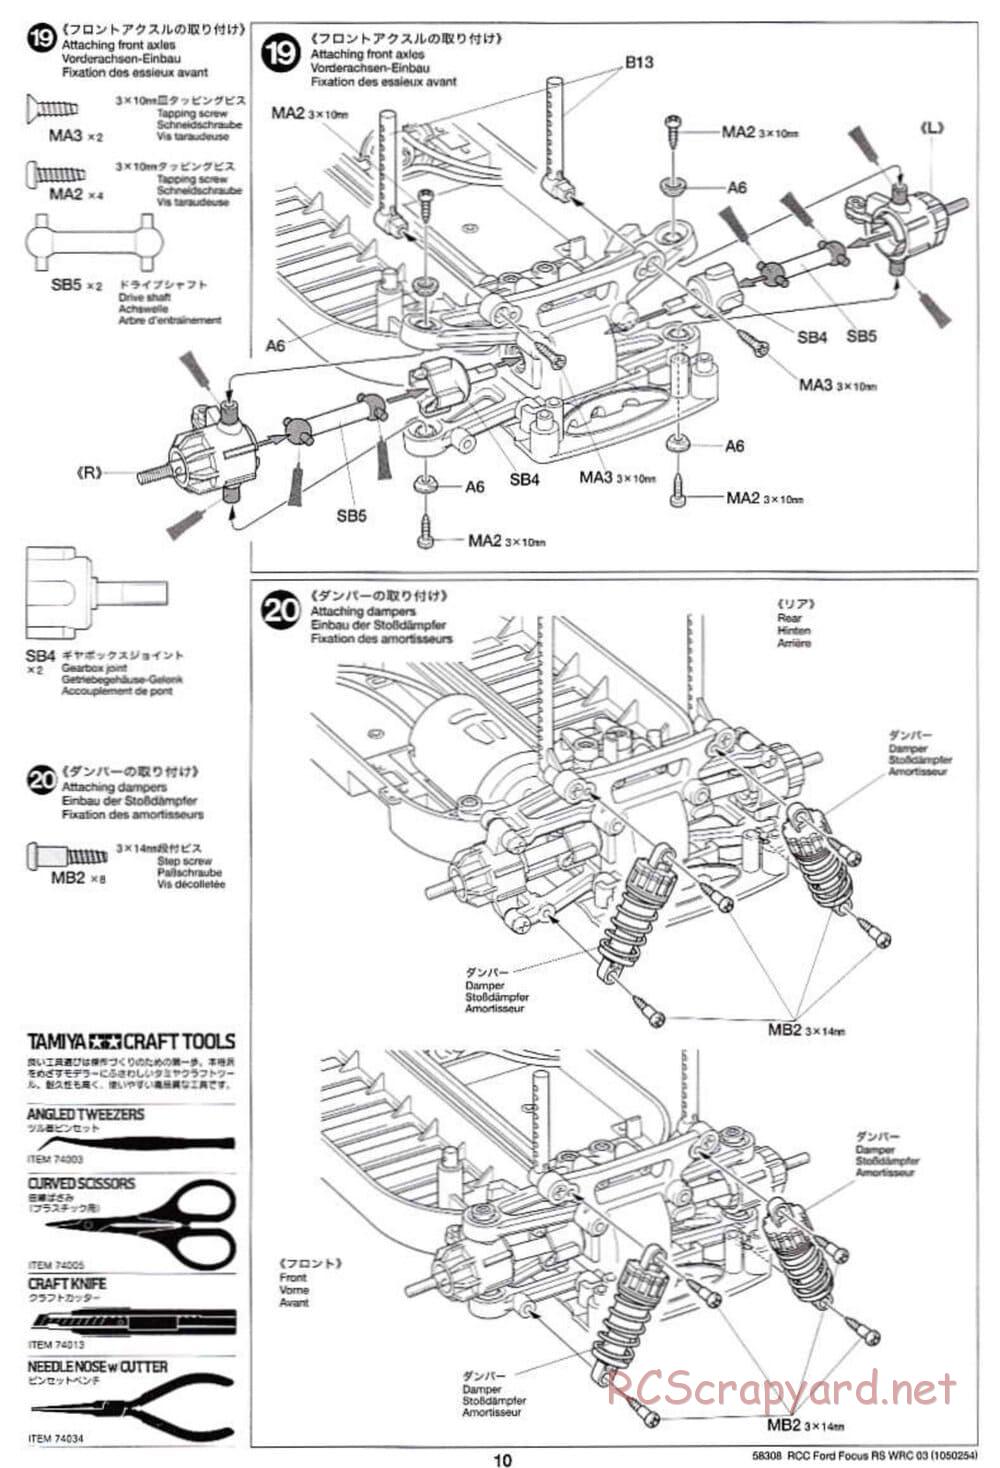 Tamiya - Ford Focus RS WRC 03 - TT-01 Chassis - Manual - Page 10